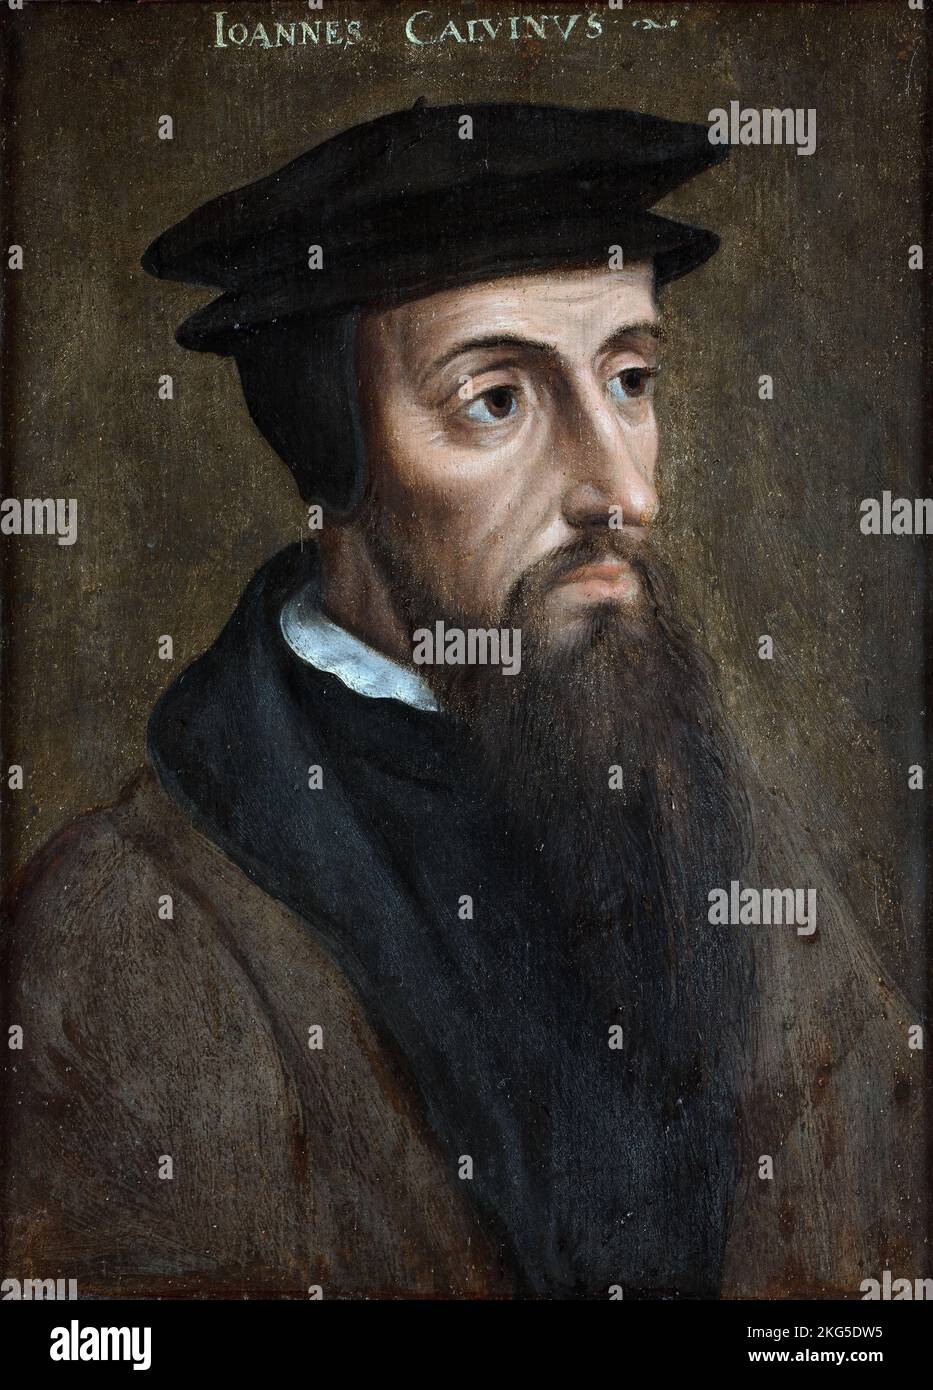 John Calvin (1509 – 1564) French theologian, pastor and reformer in Geneva during the Protestant Reformation. Stock Photo